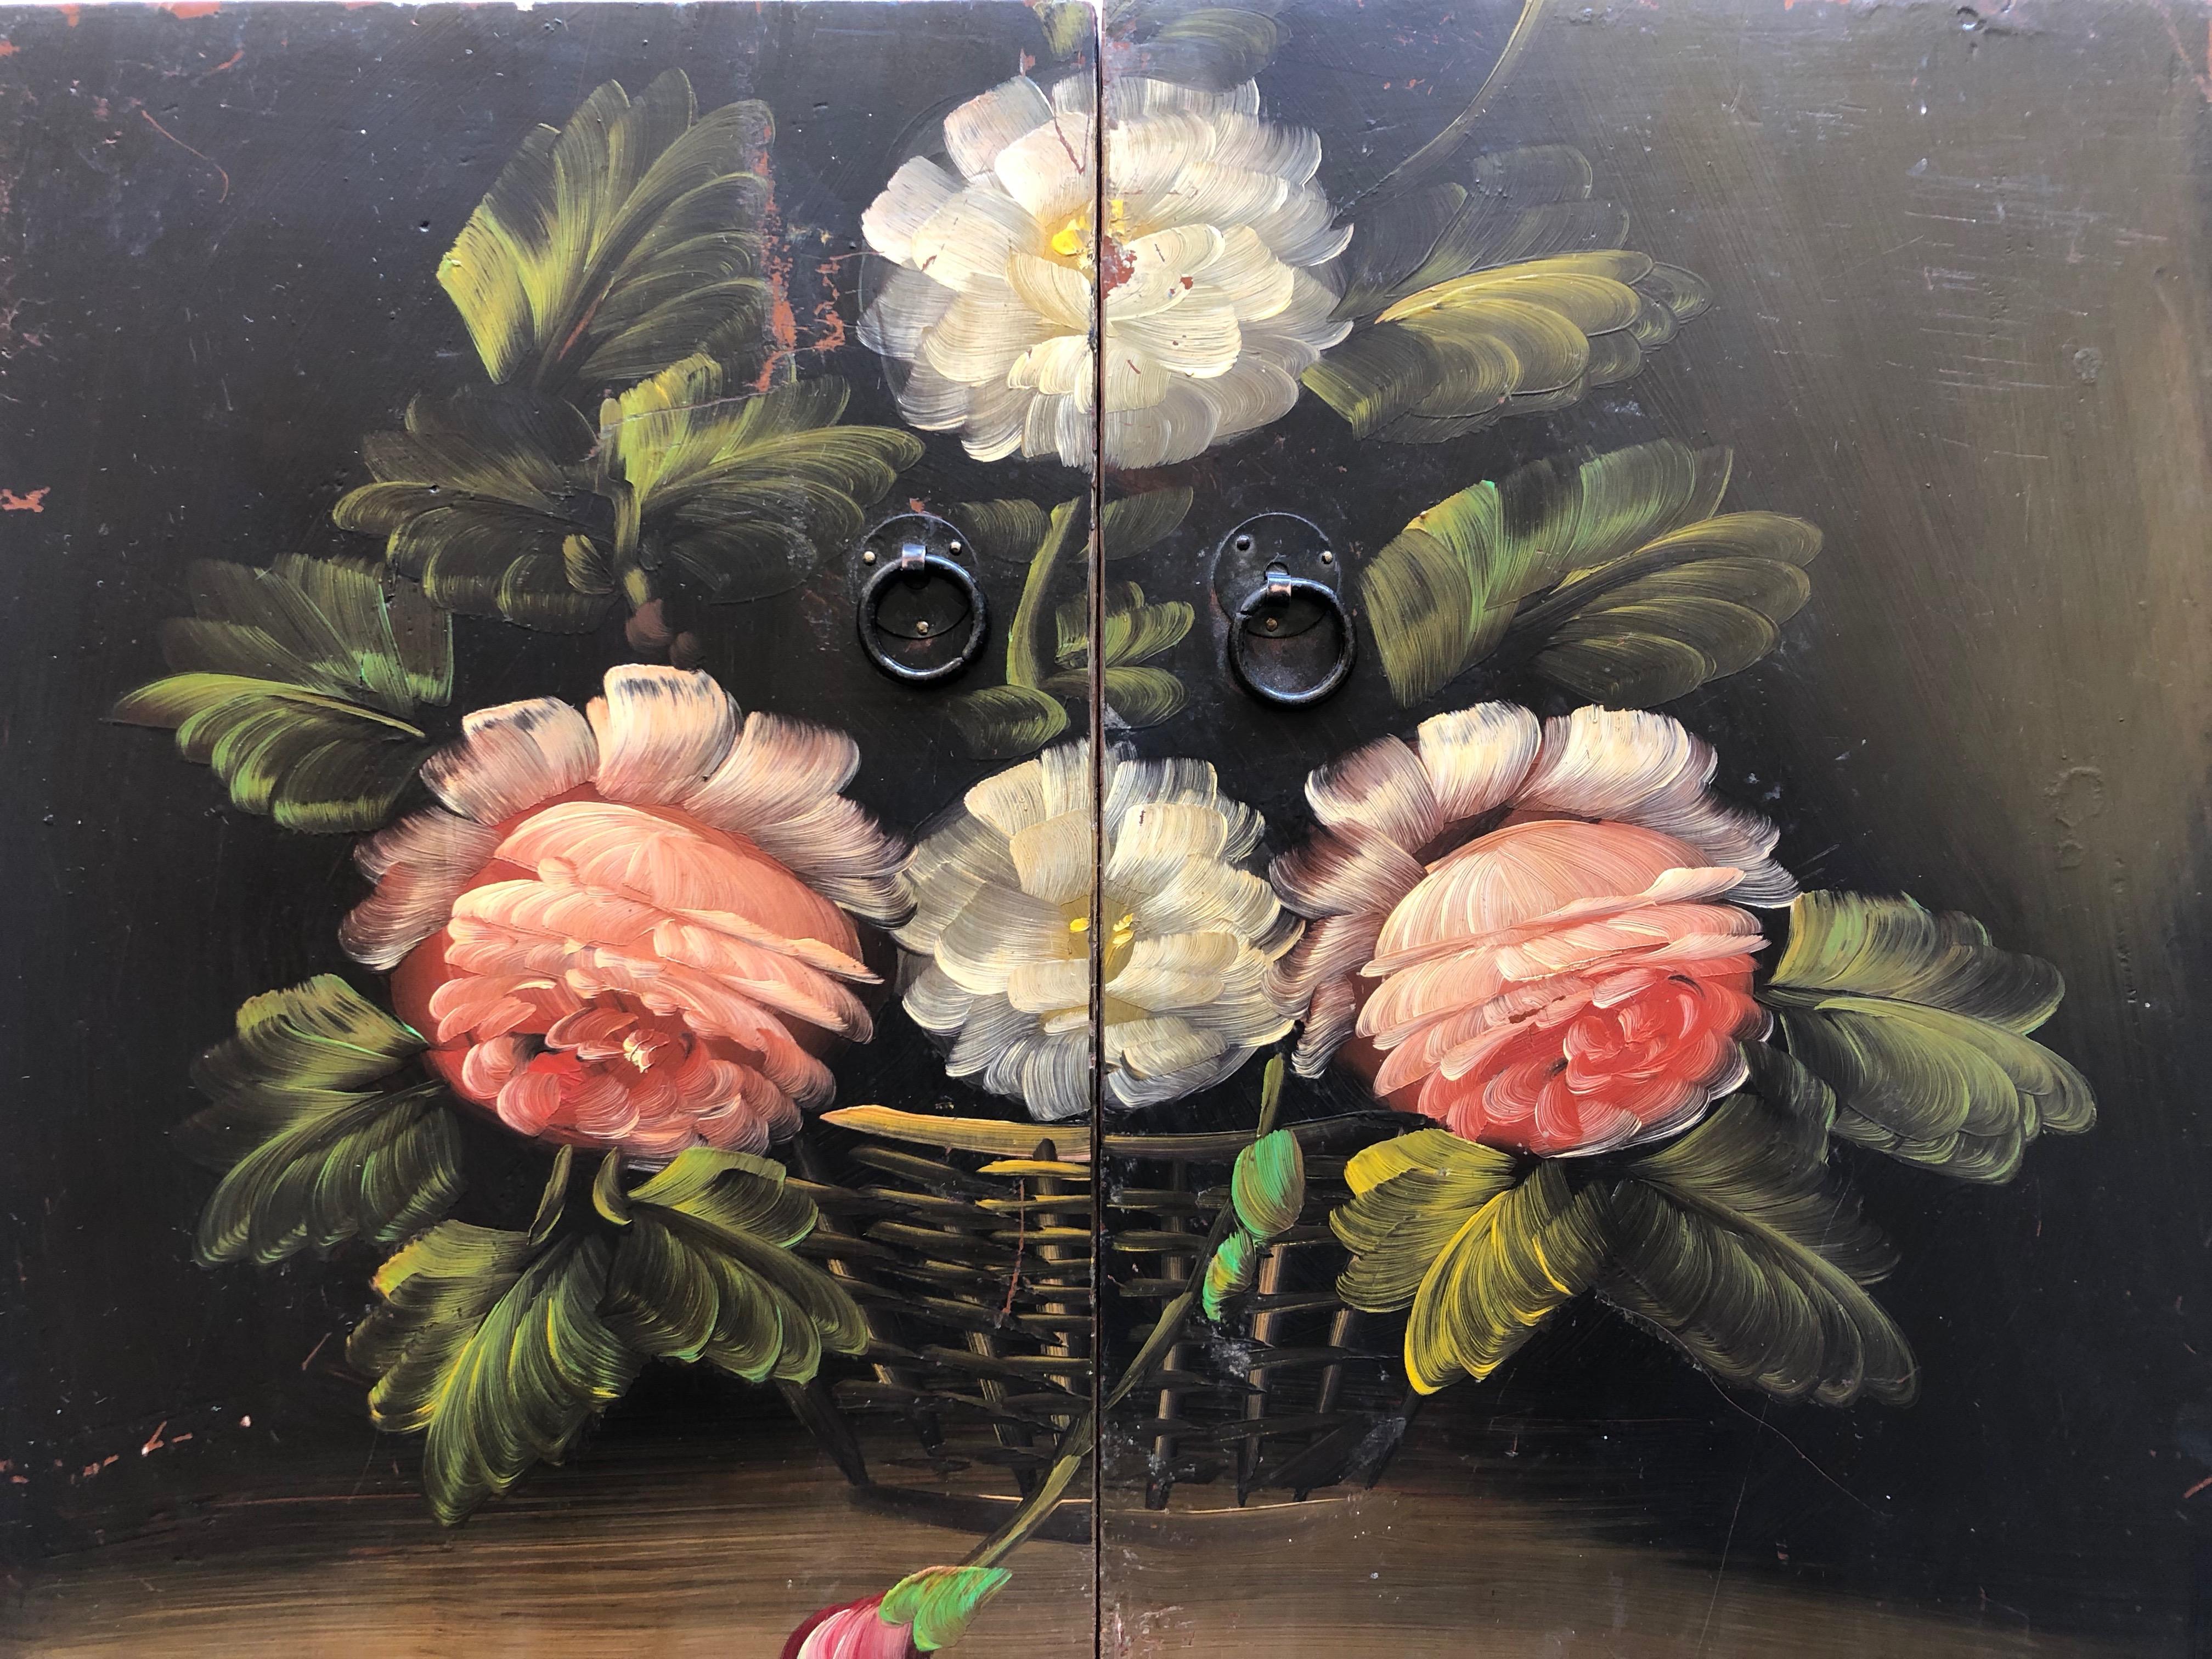 This French antique pair of hand painted cabinet doors with flowers is truly incredible. The detail and colors painted on each door is stunning and the two doors closed are an amazing original work of art that could be hung as they are, used as